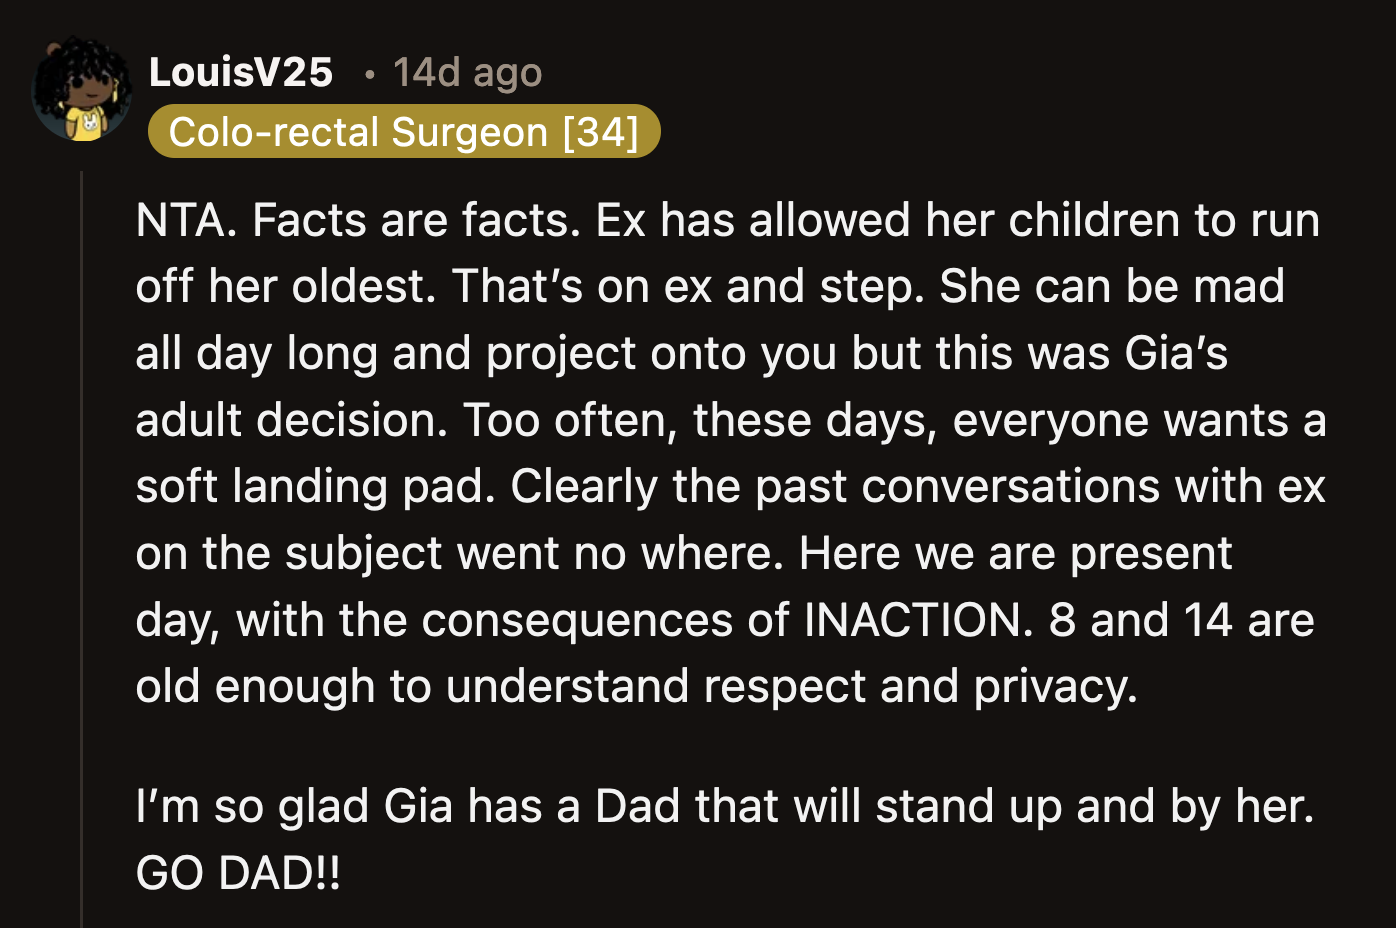 There were plenty of things Kayla should have done to correct her daughters' behaviors if she didn't want Gia to move out.